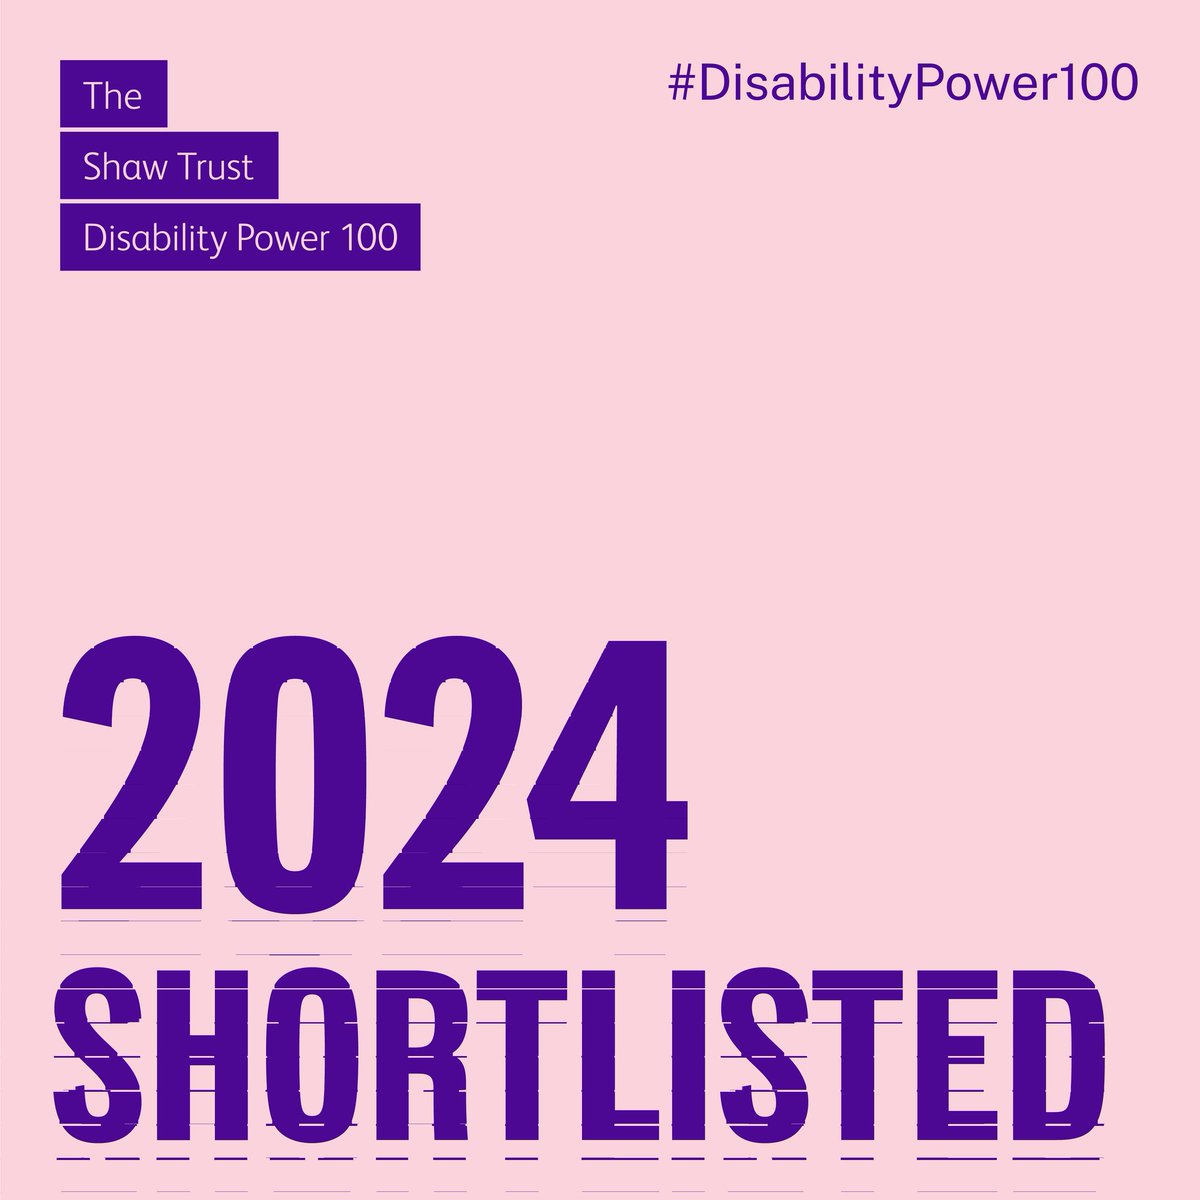 I have been shortlisted on the Shaw Trust #DisabilityPower100 as one of the top 350 people out of 786 nominations. Delighted to be shortlisted alongside such incredible people.💗

@ShawTrust @White_Lodge
@PurpleTuesNov @scope
#ambassador #publicspeaker #Acca #disabledblogger